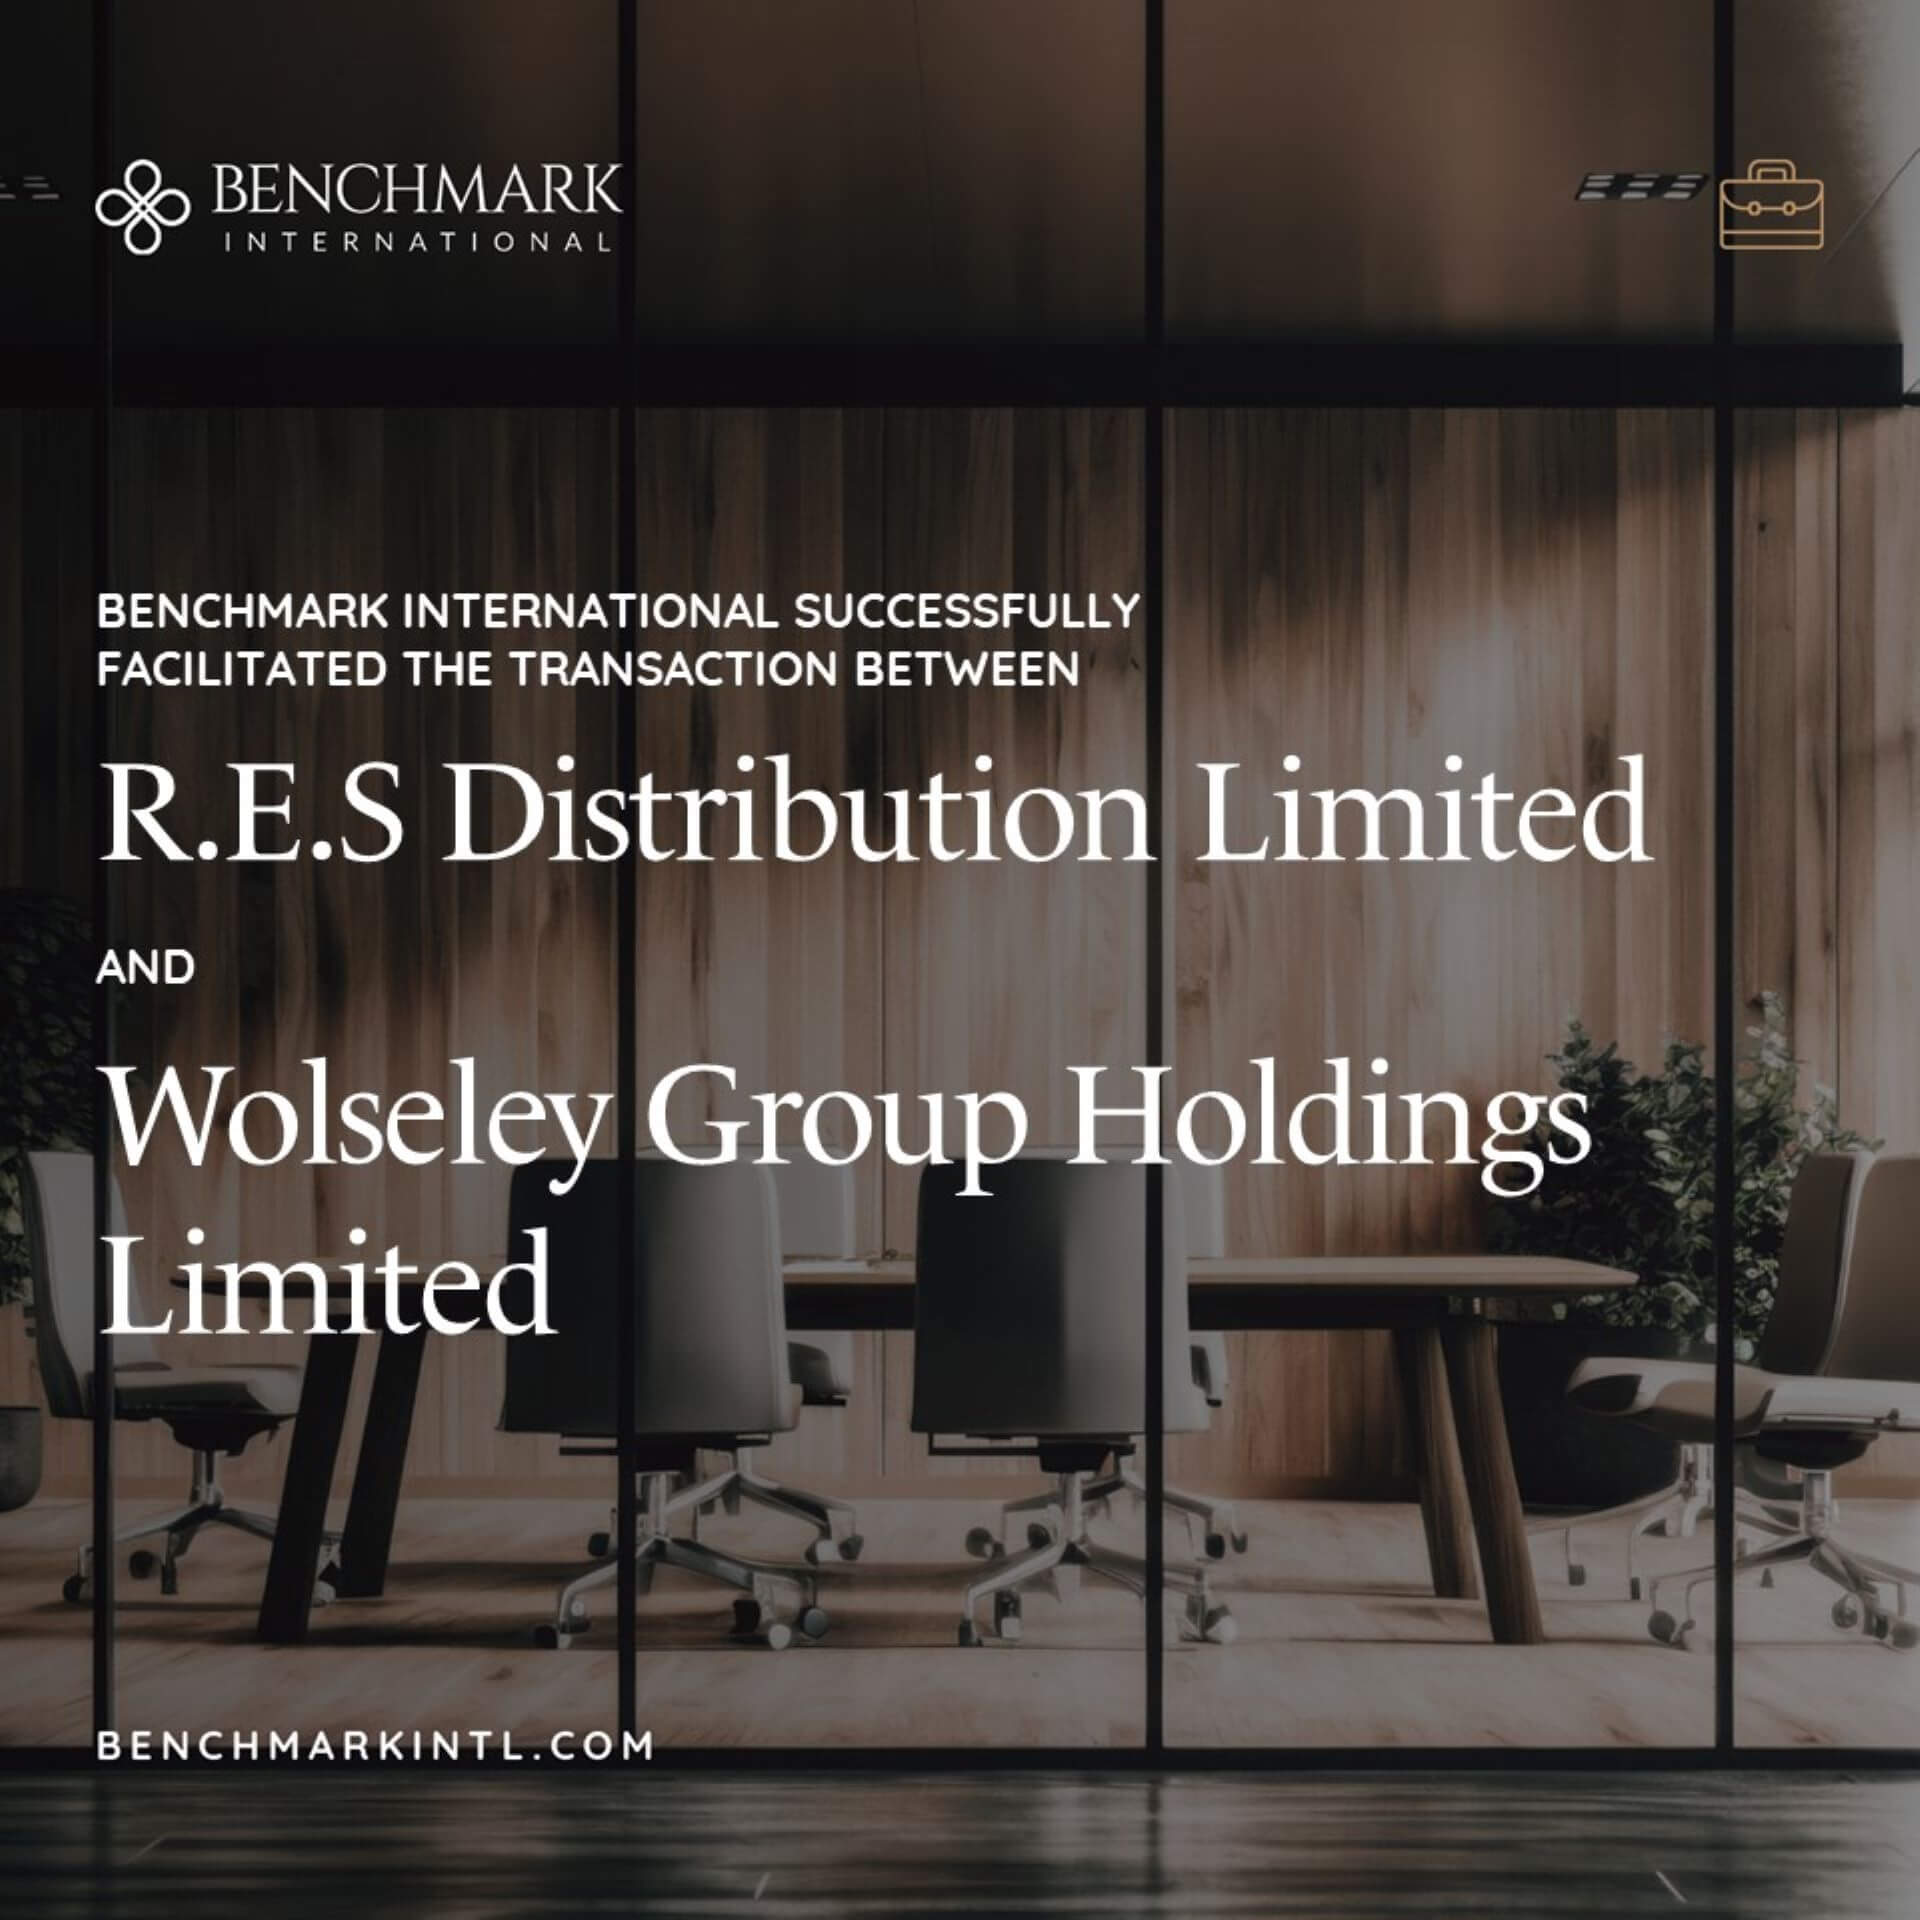 R.E.S acquired by Wolseley